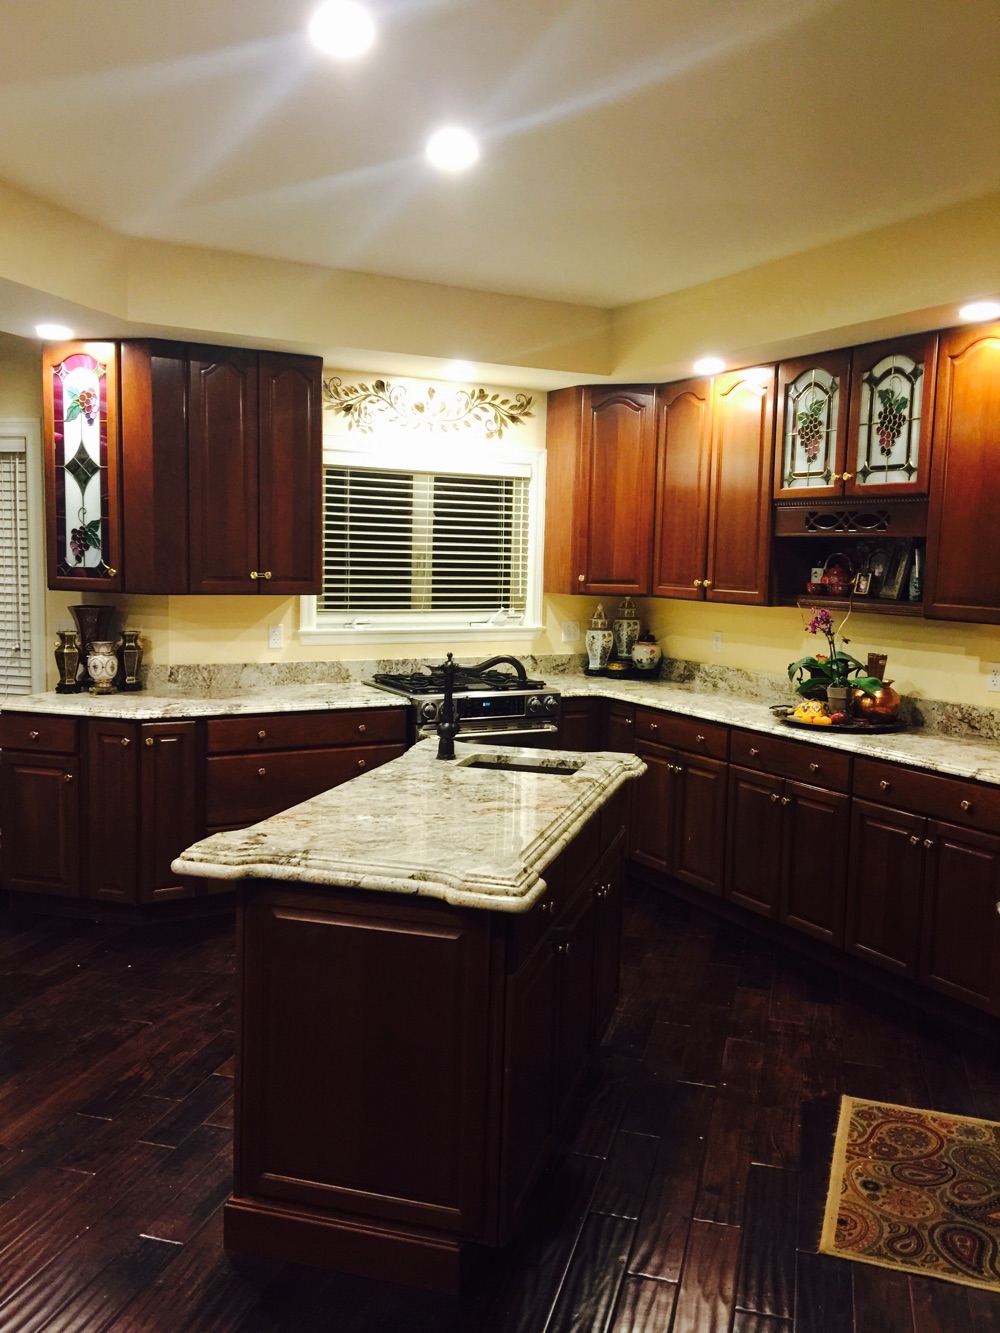 Installing Granite Or Cabinet Refacing Which Comes First